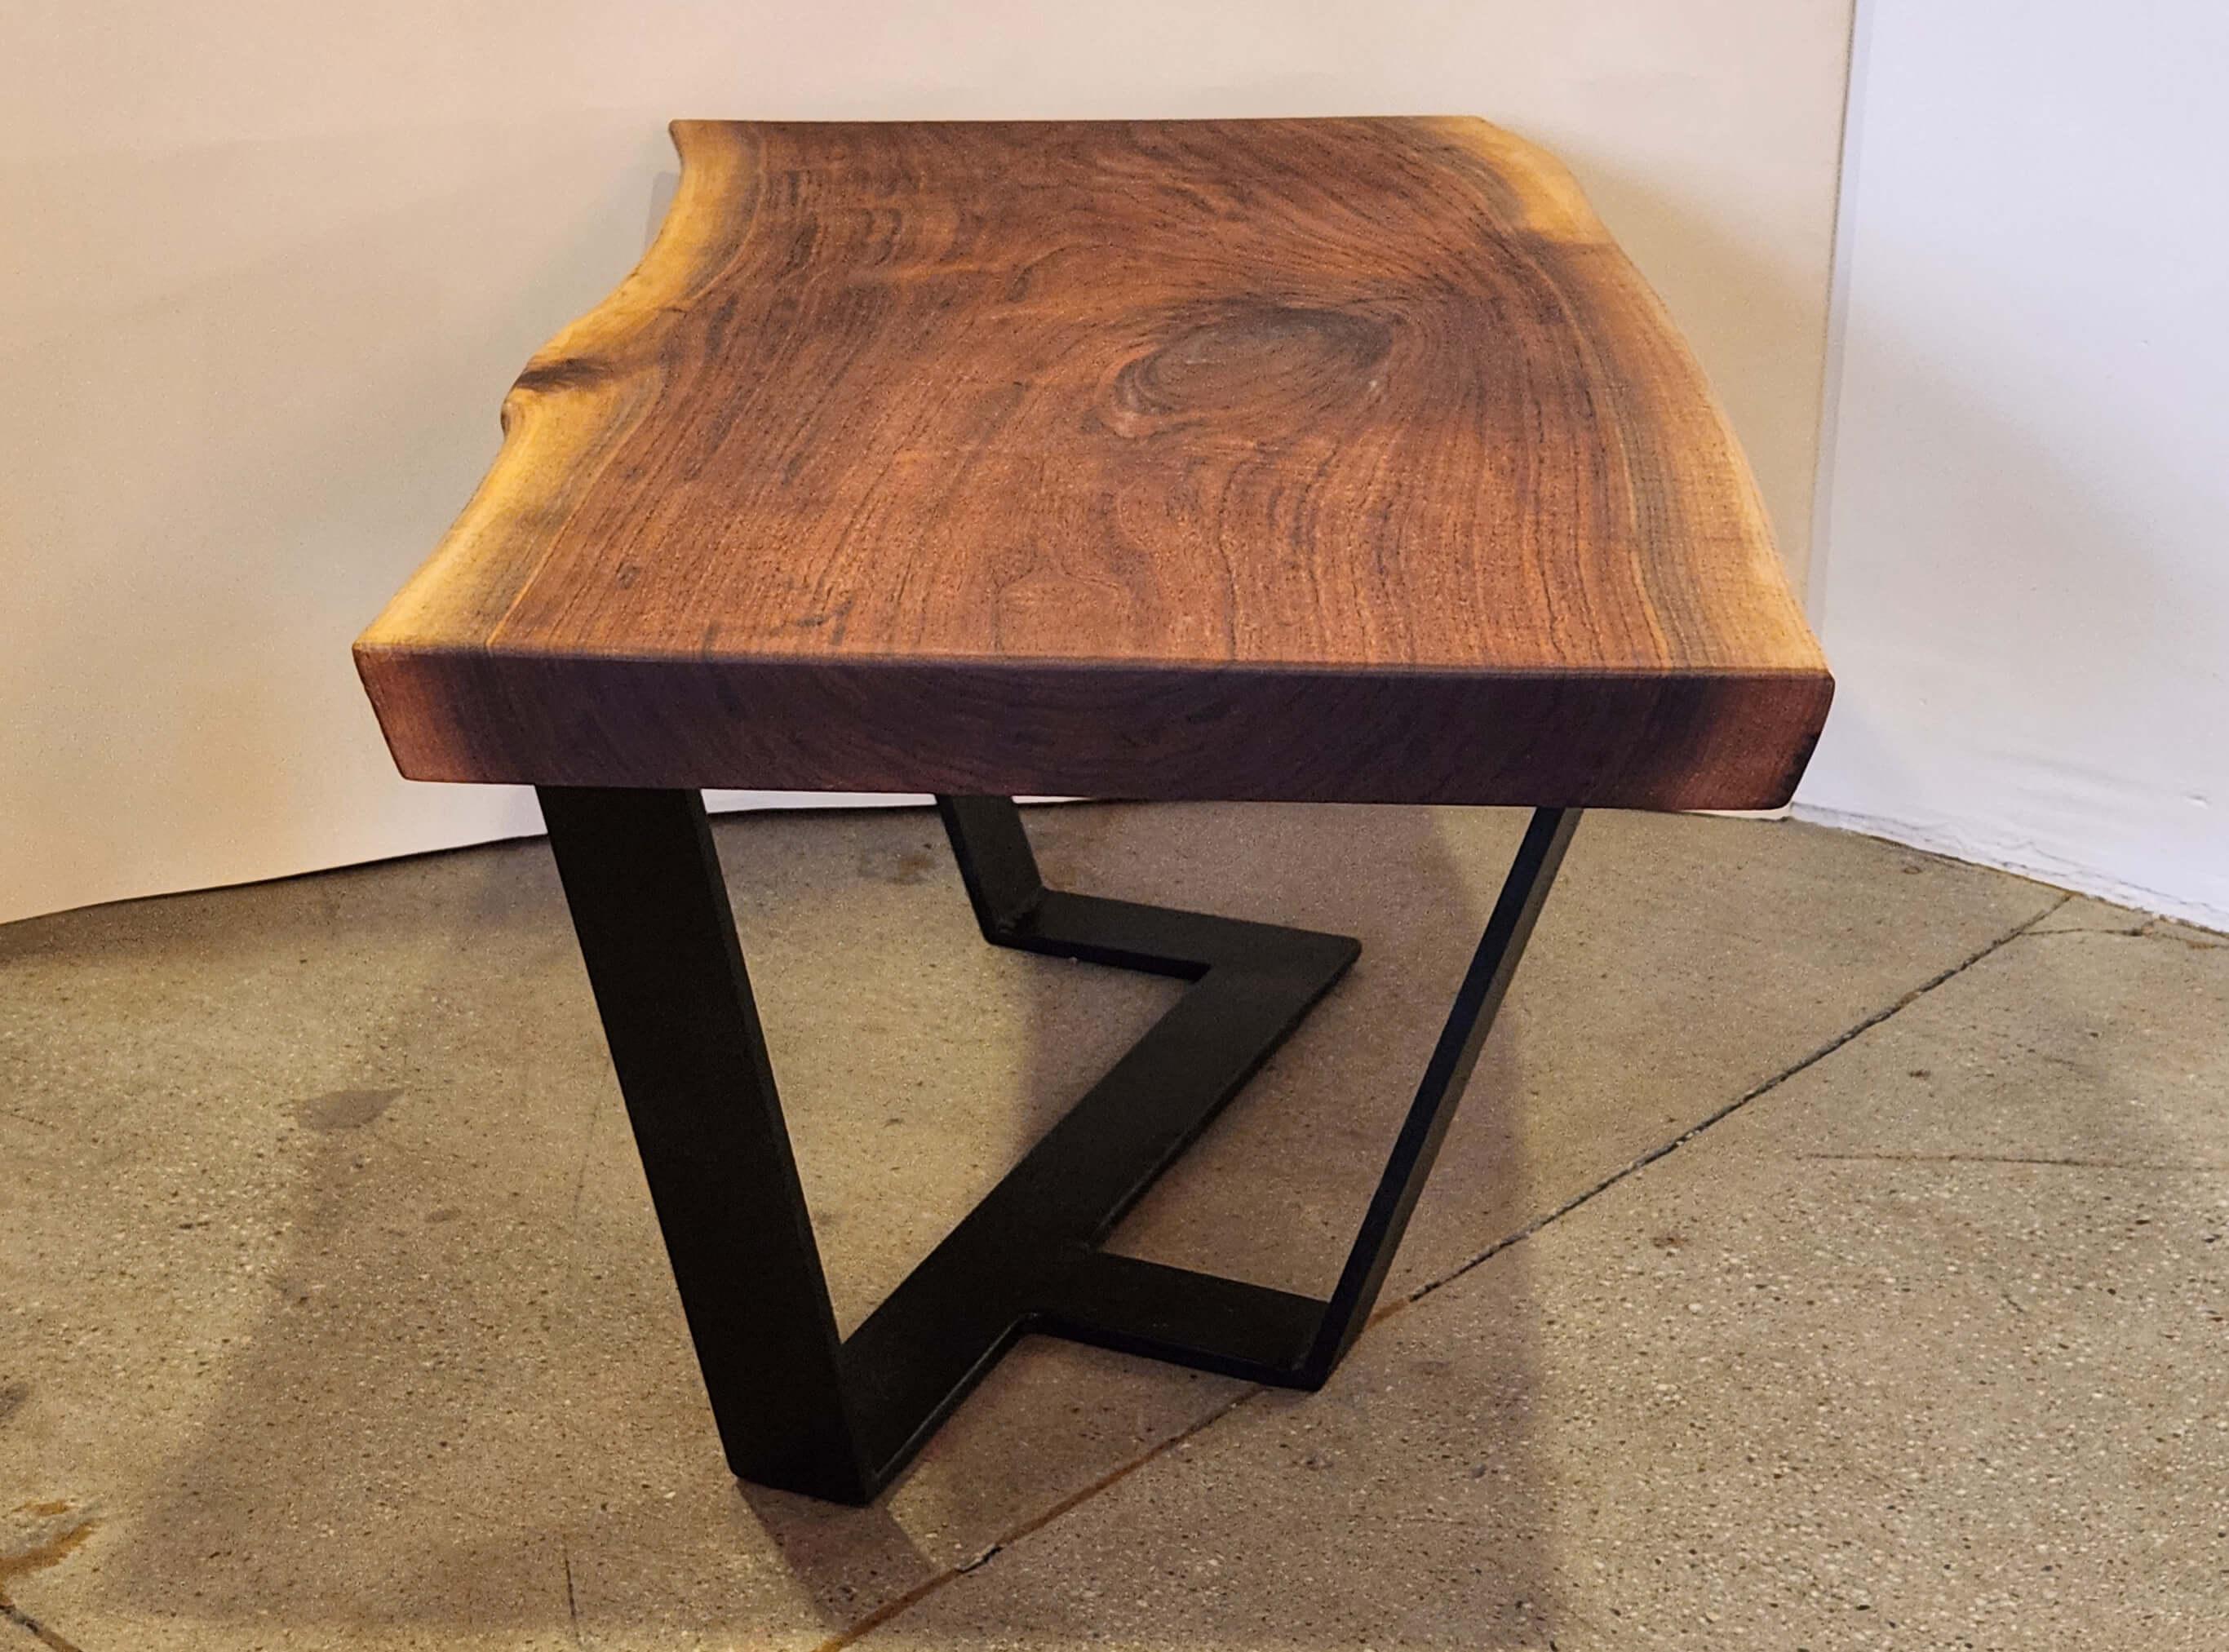 Hand-Crafted Walnut Wood Slab Coffee Table with Metal Base by Creation Therrien For Sale